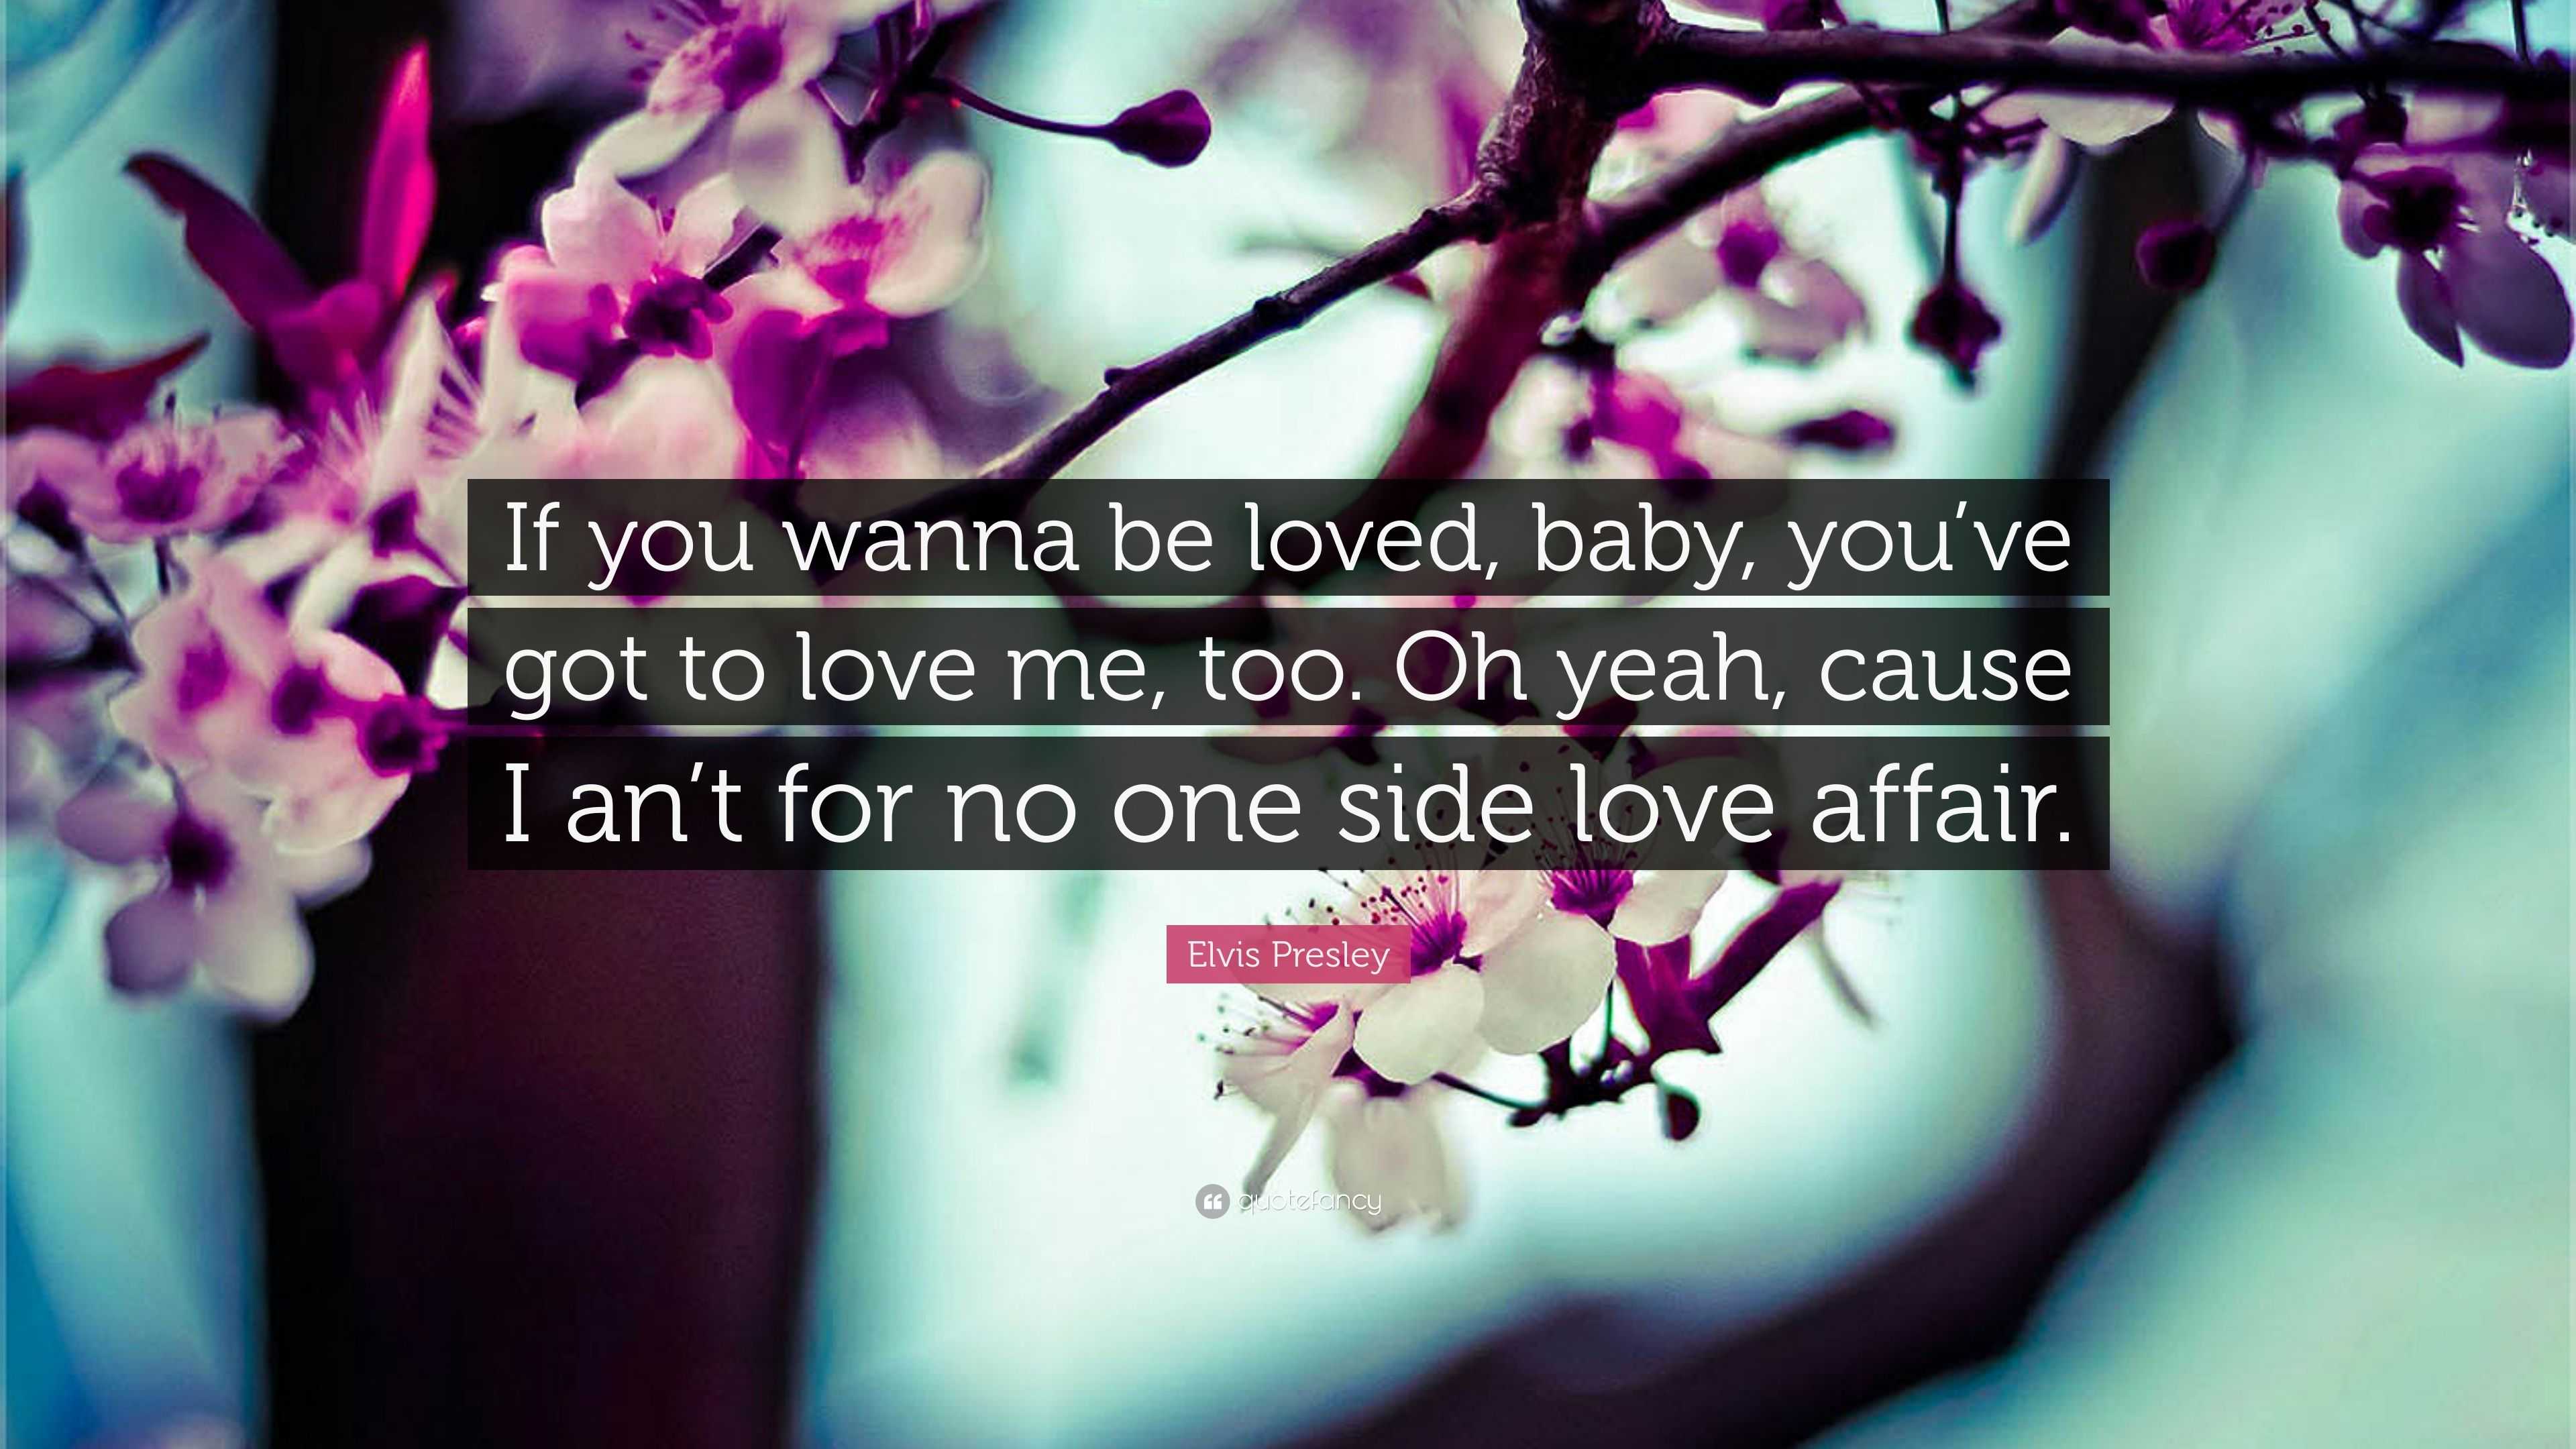 Elvis Presley Quote “If you wanna be loved baby you ve